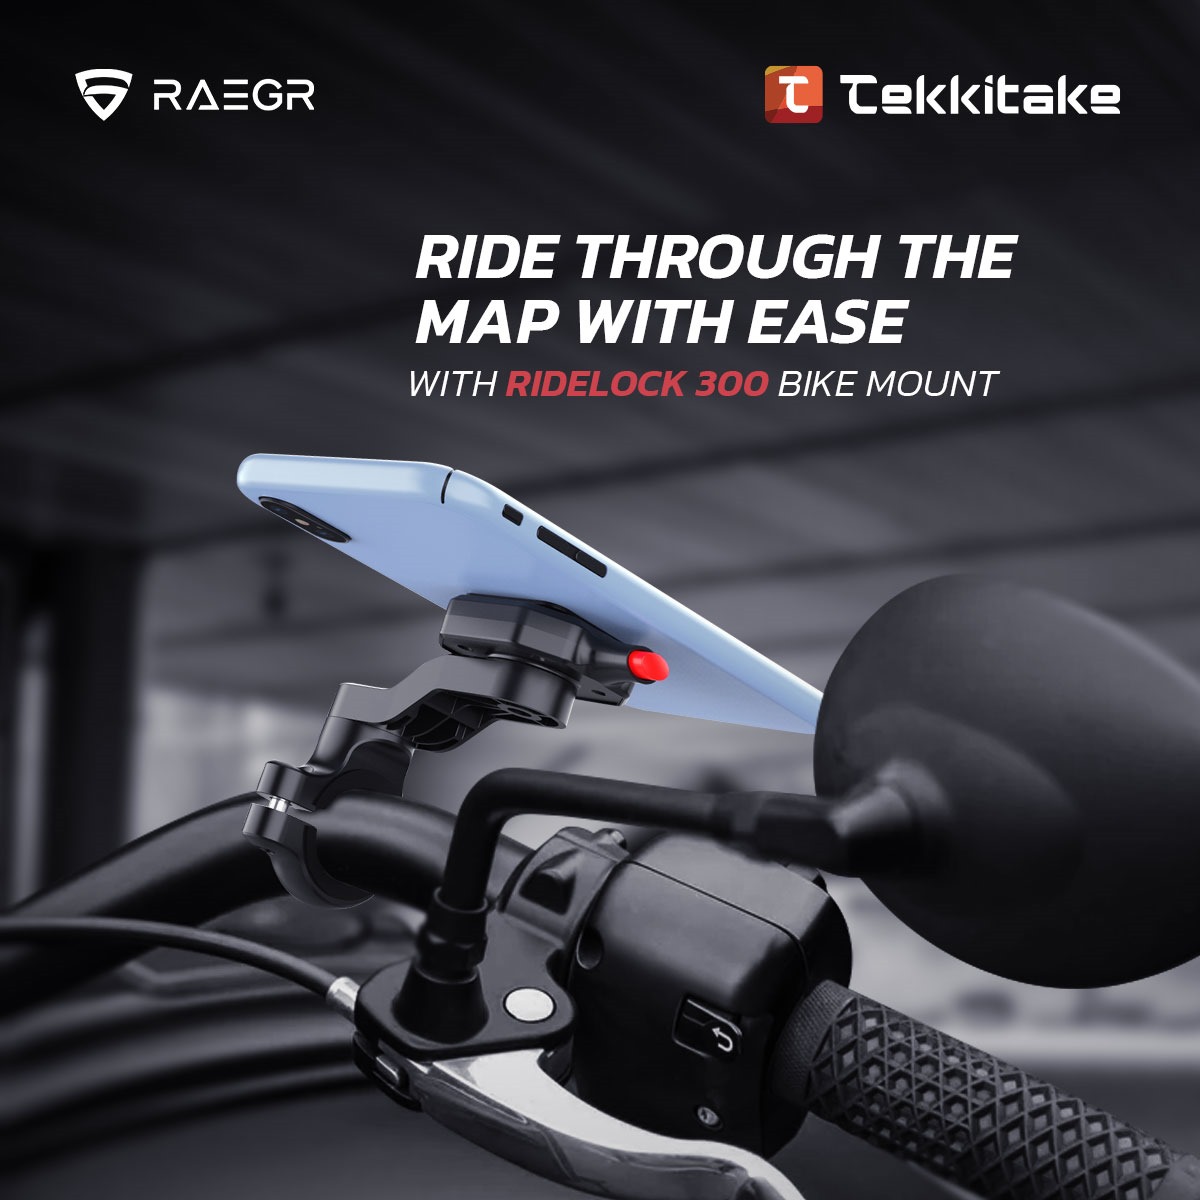 The RAEGR RideLock 300A is a fan-favorite! Made of sturdy metal and practical ABS, you can easily stay hands-free on the road, and stay safe.

Buy Now!
Tekkitake:postly.app/3TYx
Amazon:postly.app/3TYy

#Tekkitake #RAEGR #Ridelock300A